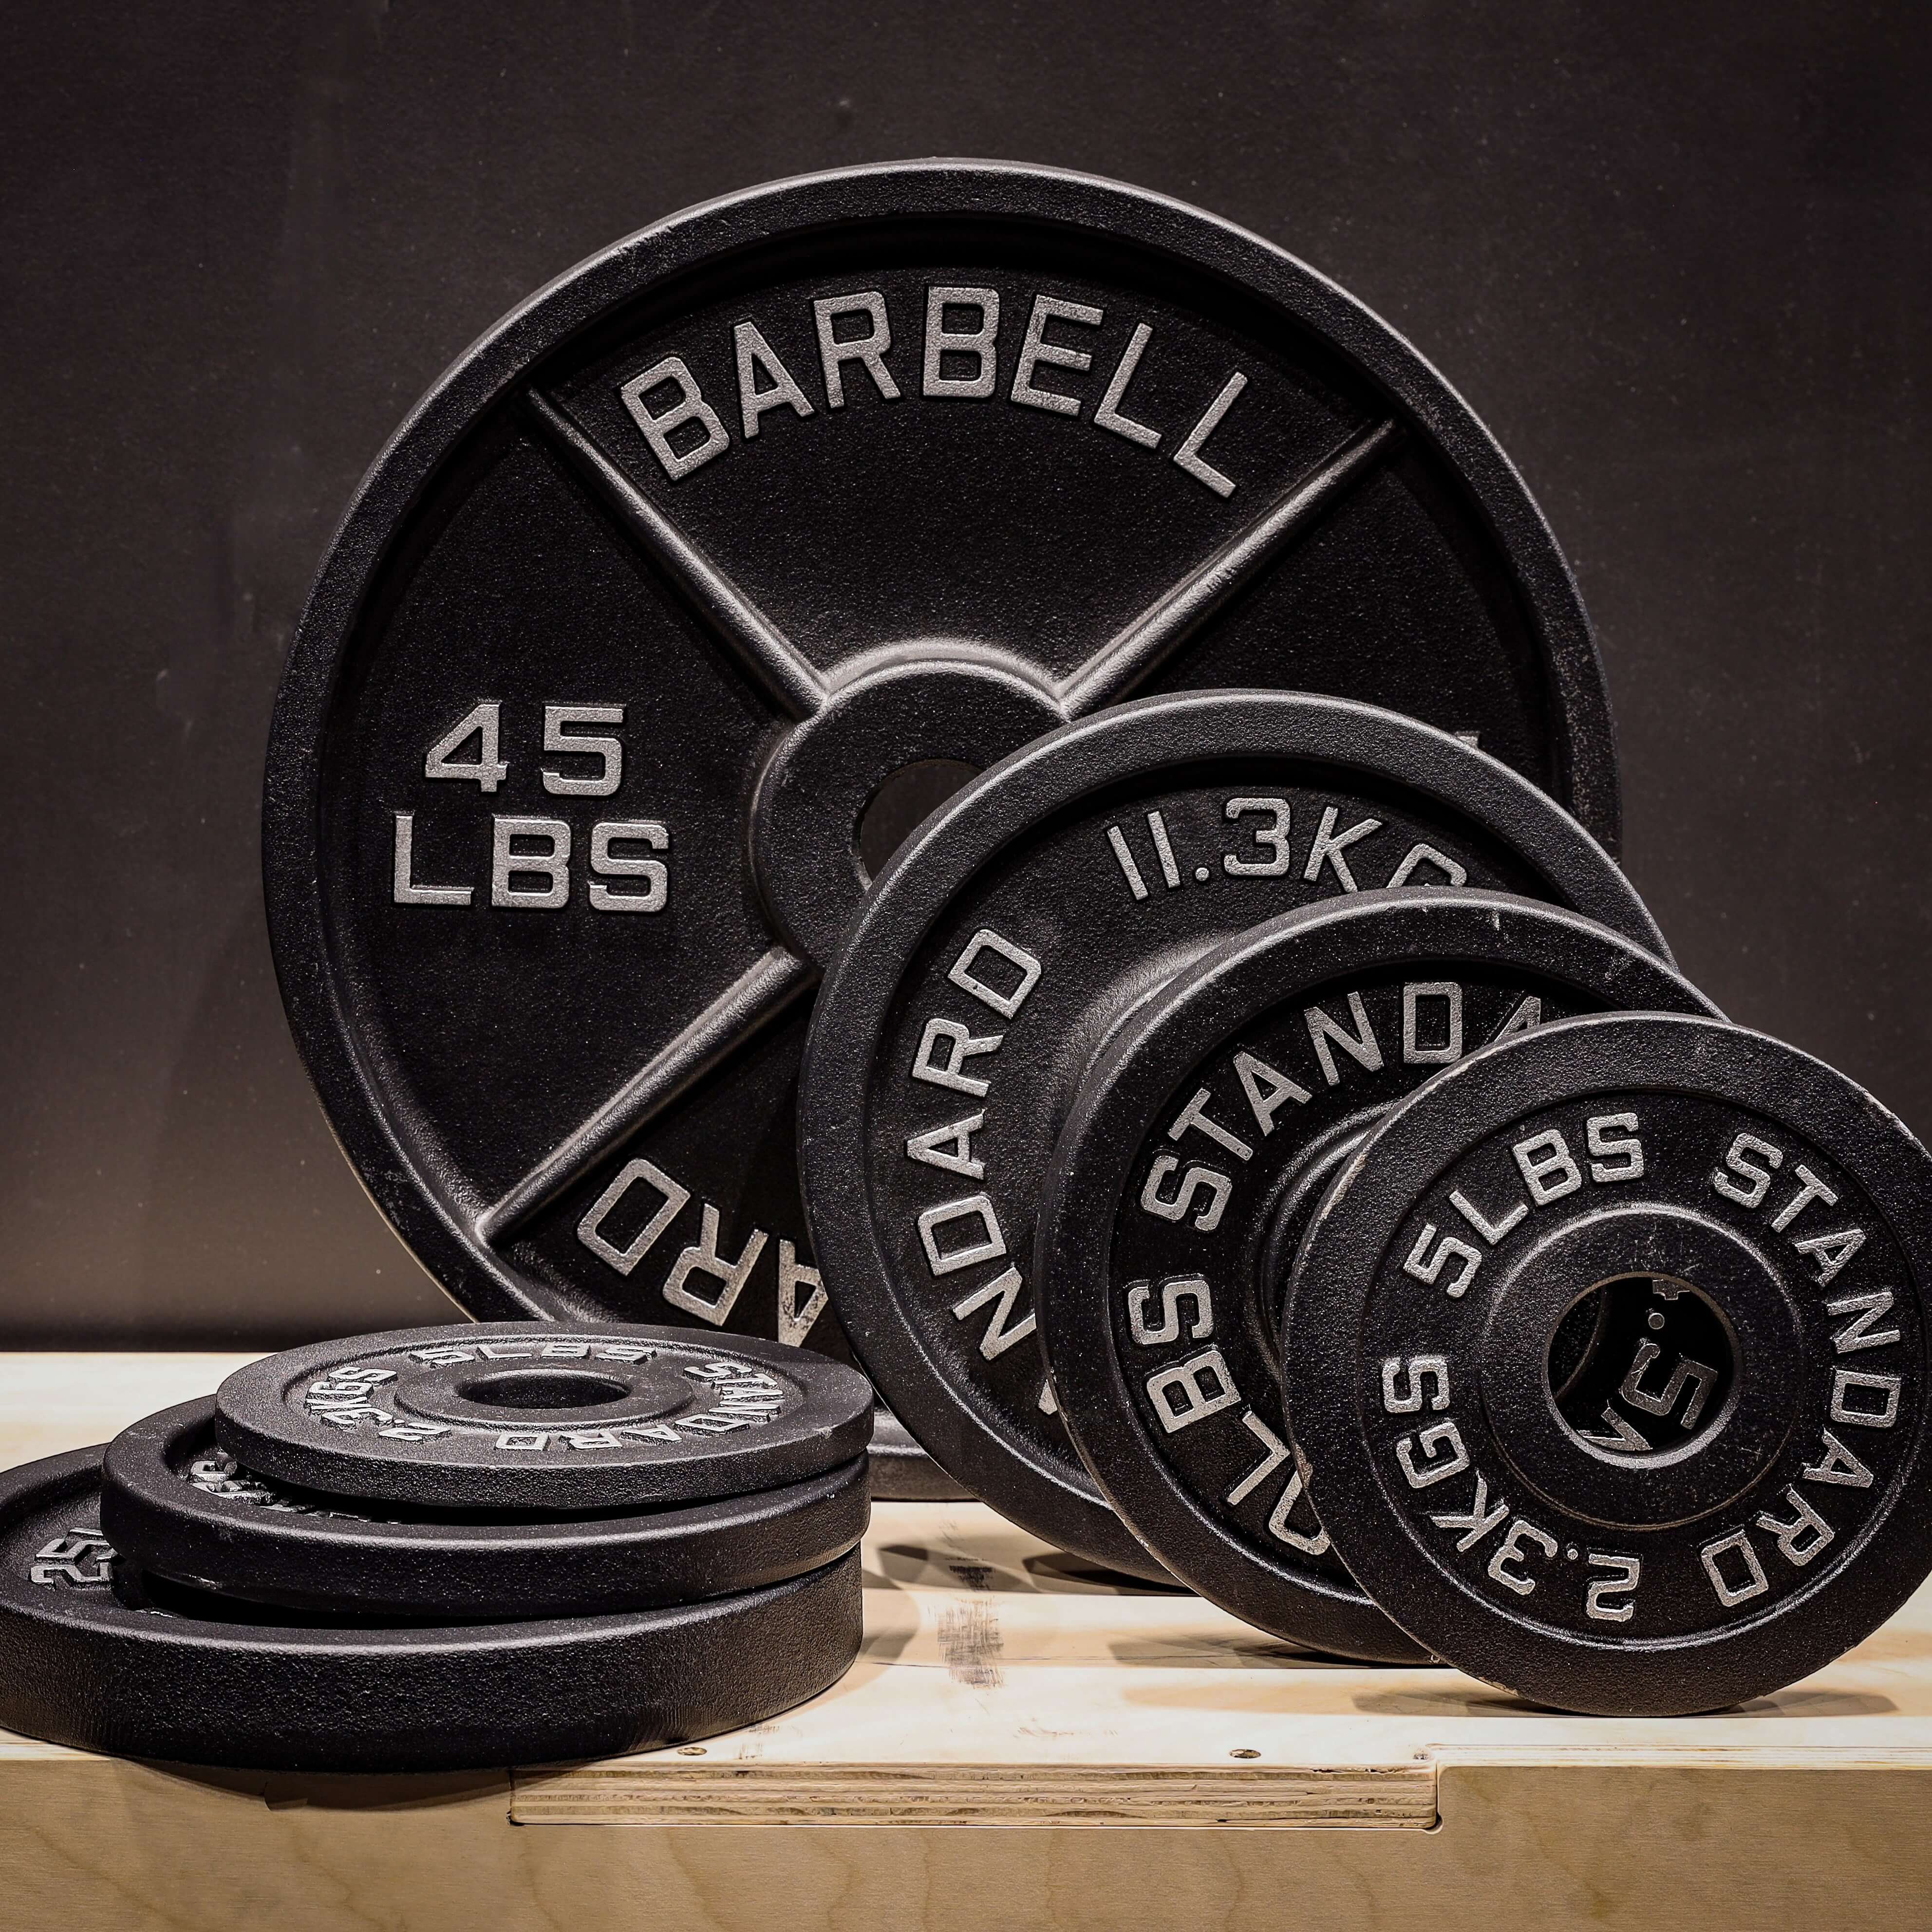 Mighty Fitness Cast Iron - Barbell Standard - Elite Series 170lbs SET